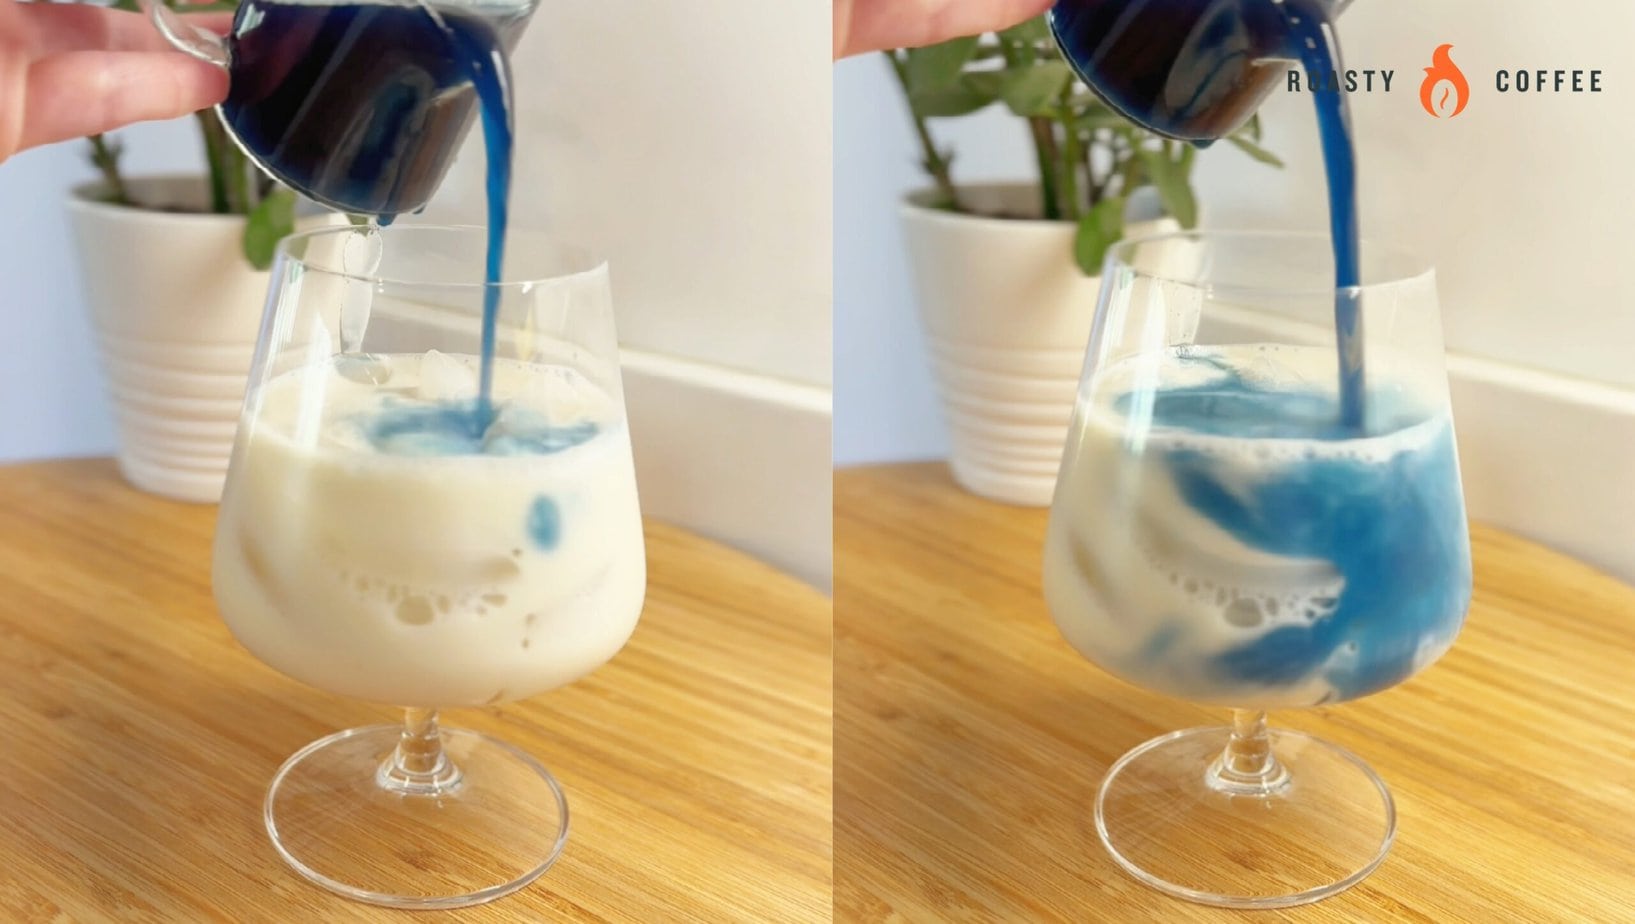 pouring Butterfly pea flower tea into a glass with ice and milk